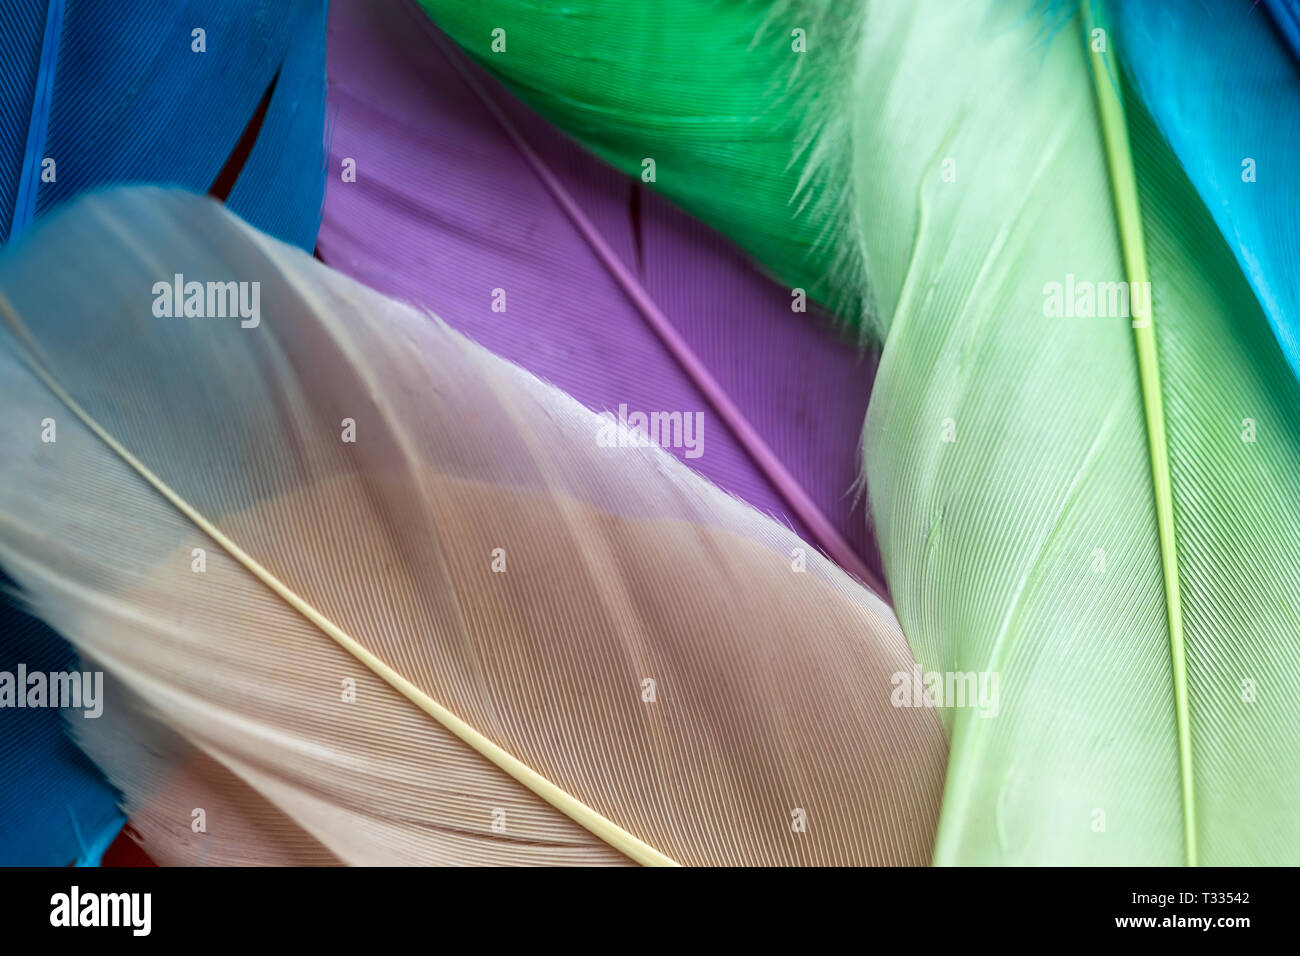 Colorful artificial feathers texture close up Stock Photo